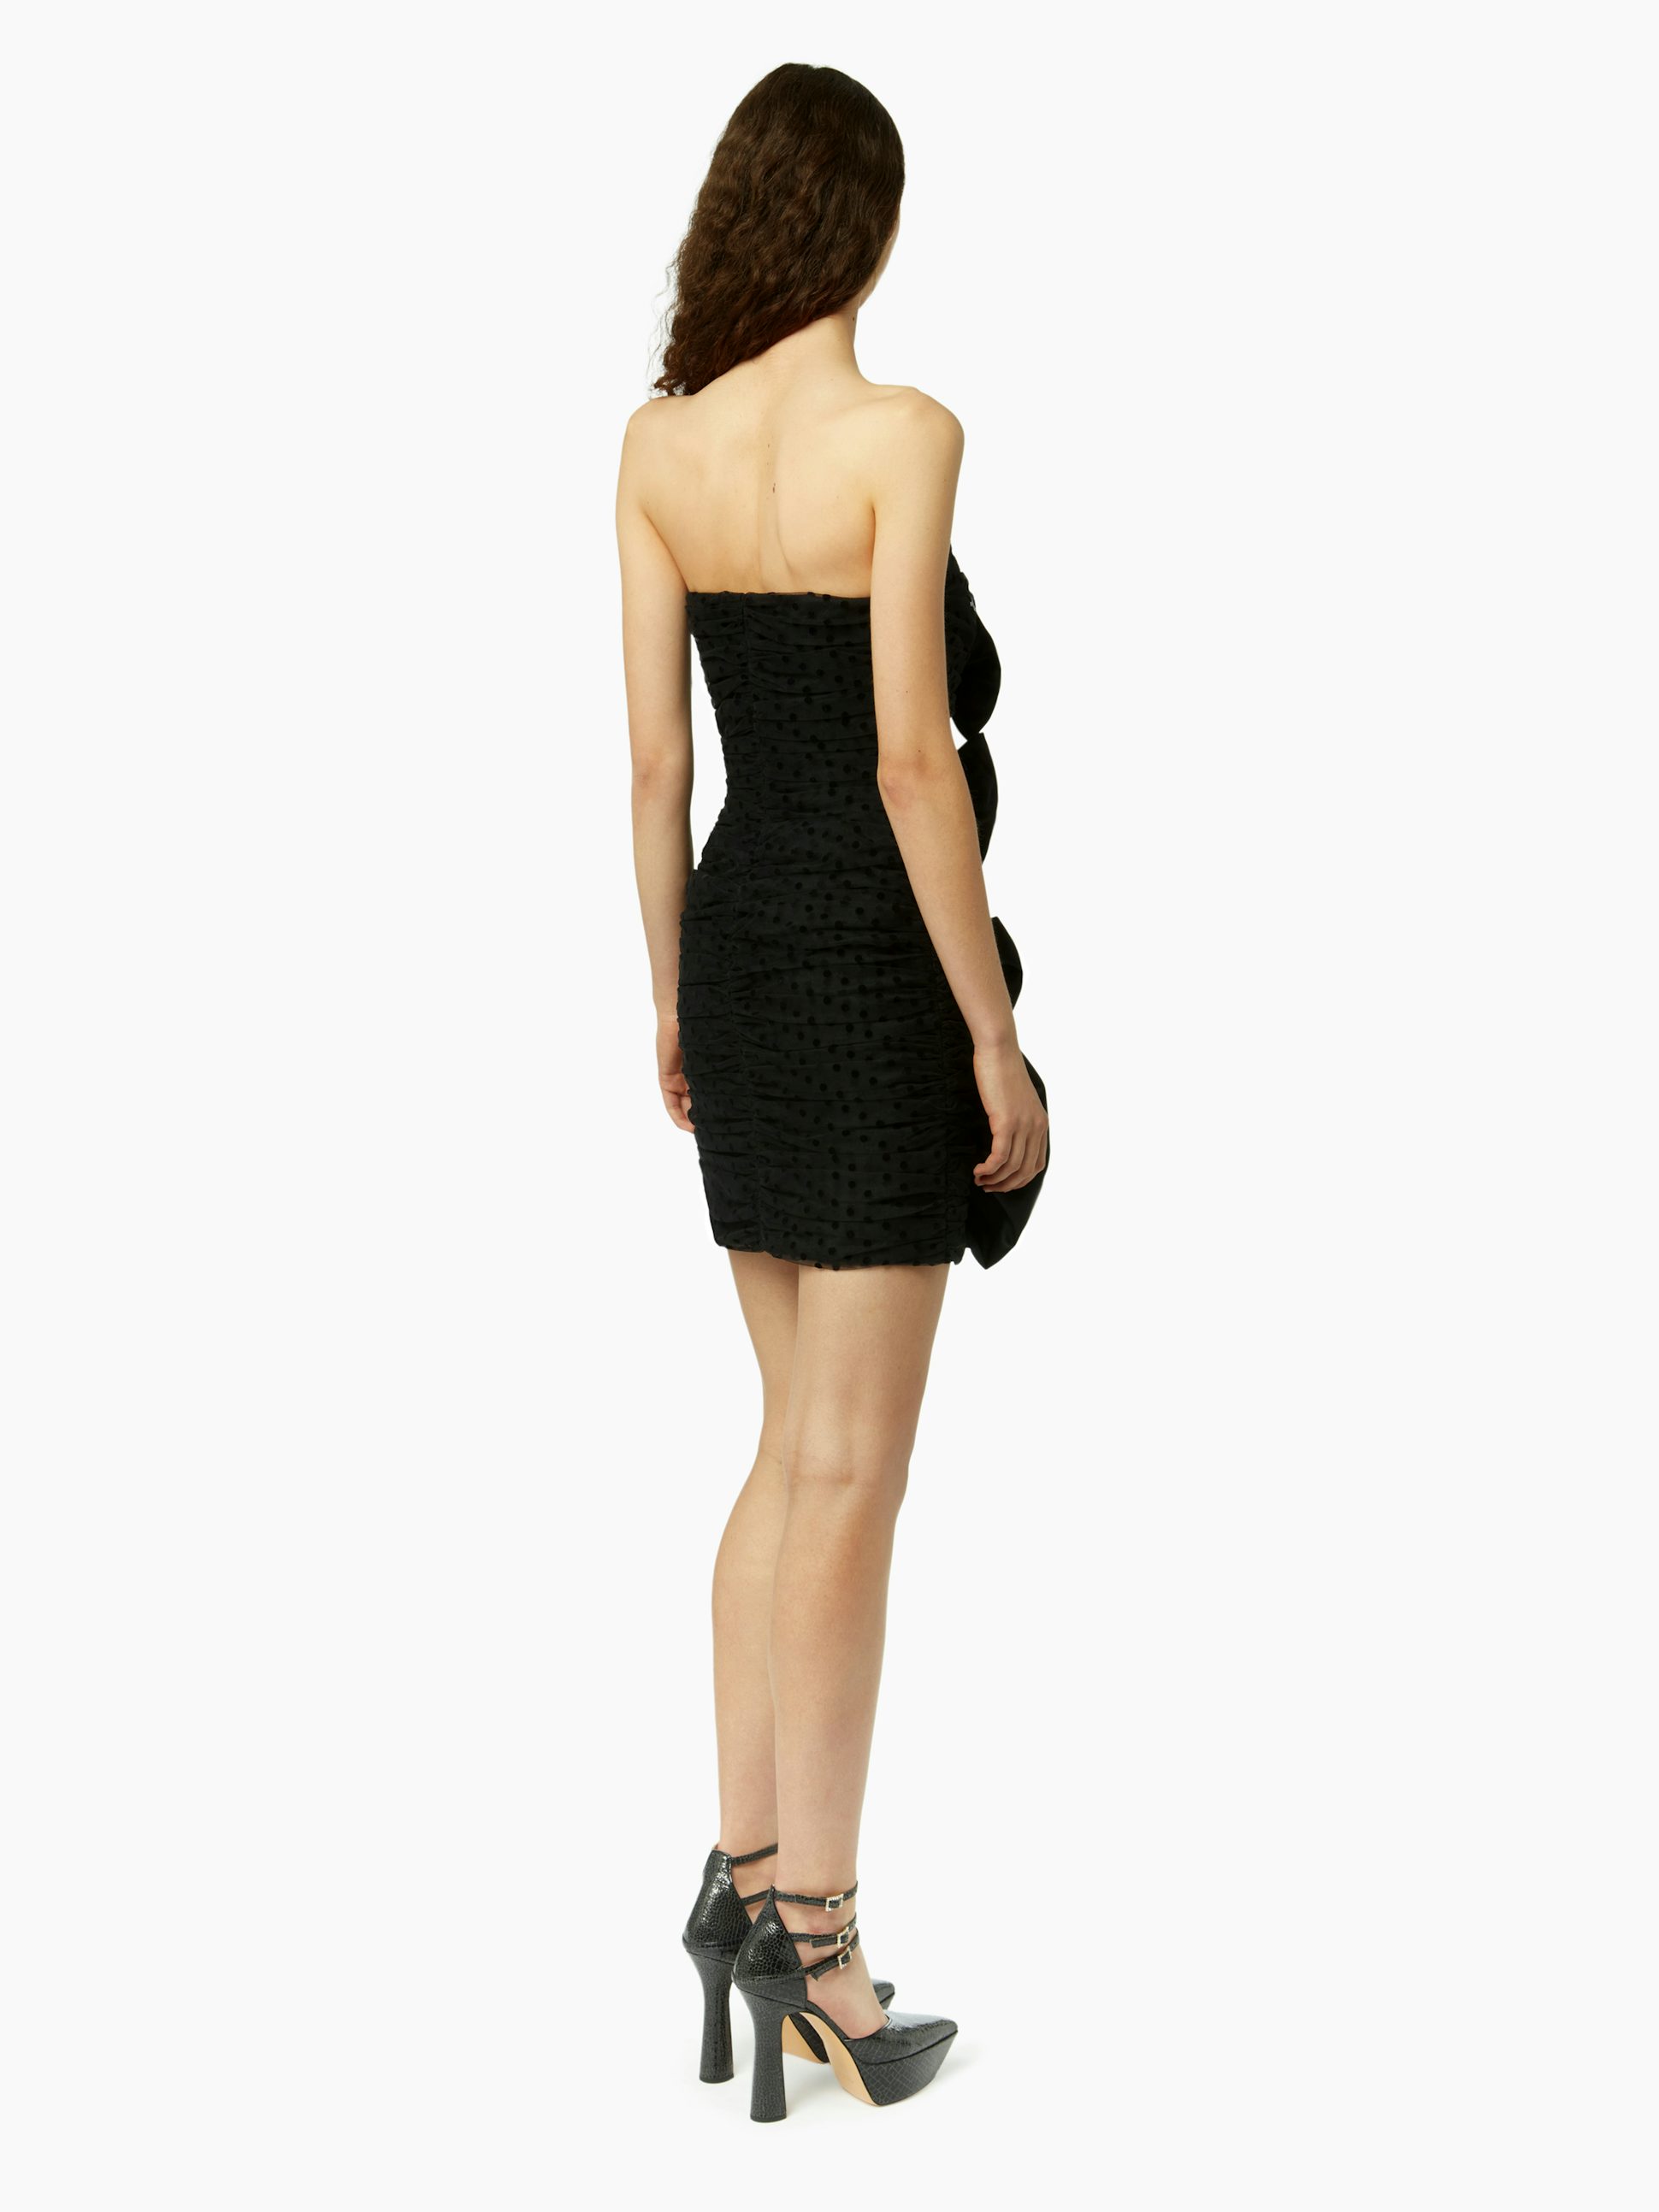 Bustier dress with bow details in black - Nina Ricci